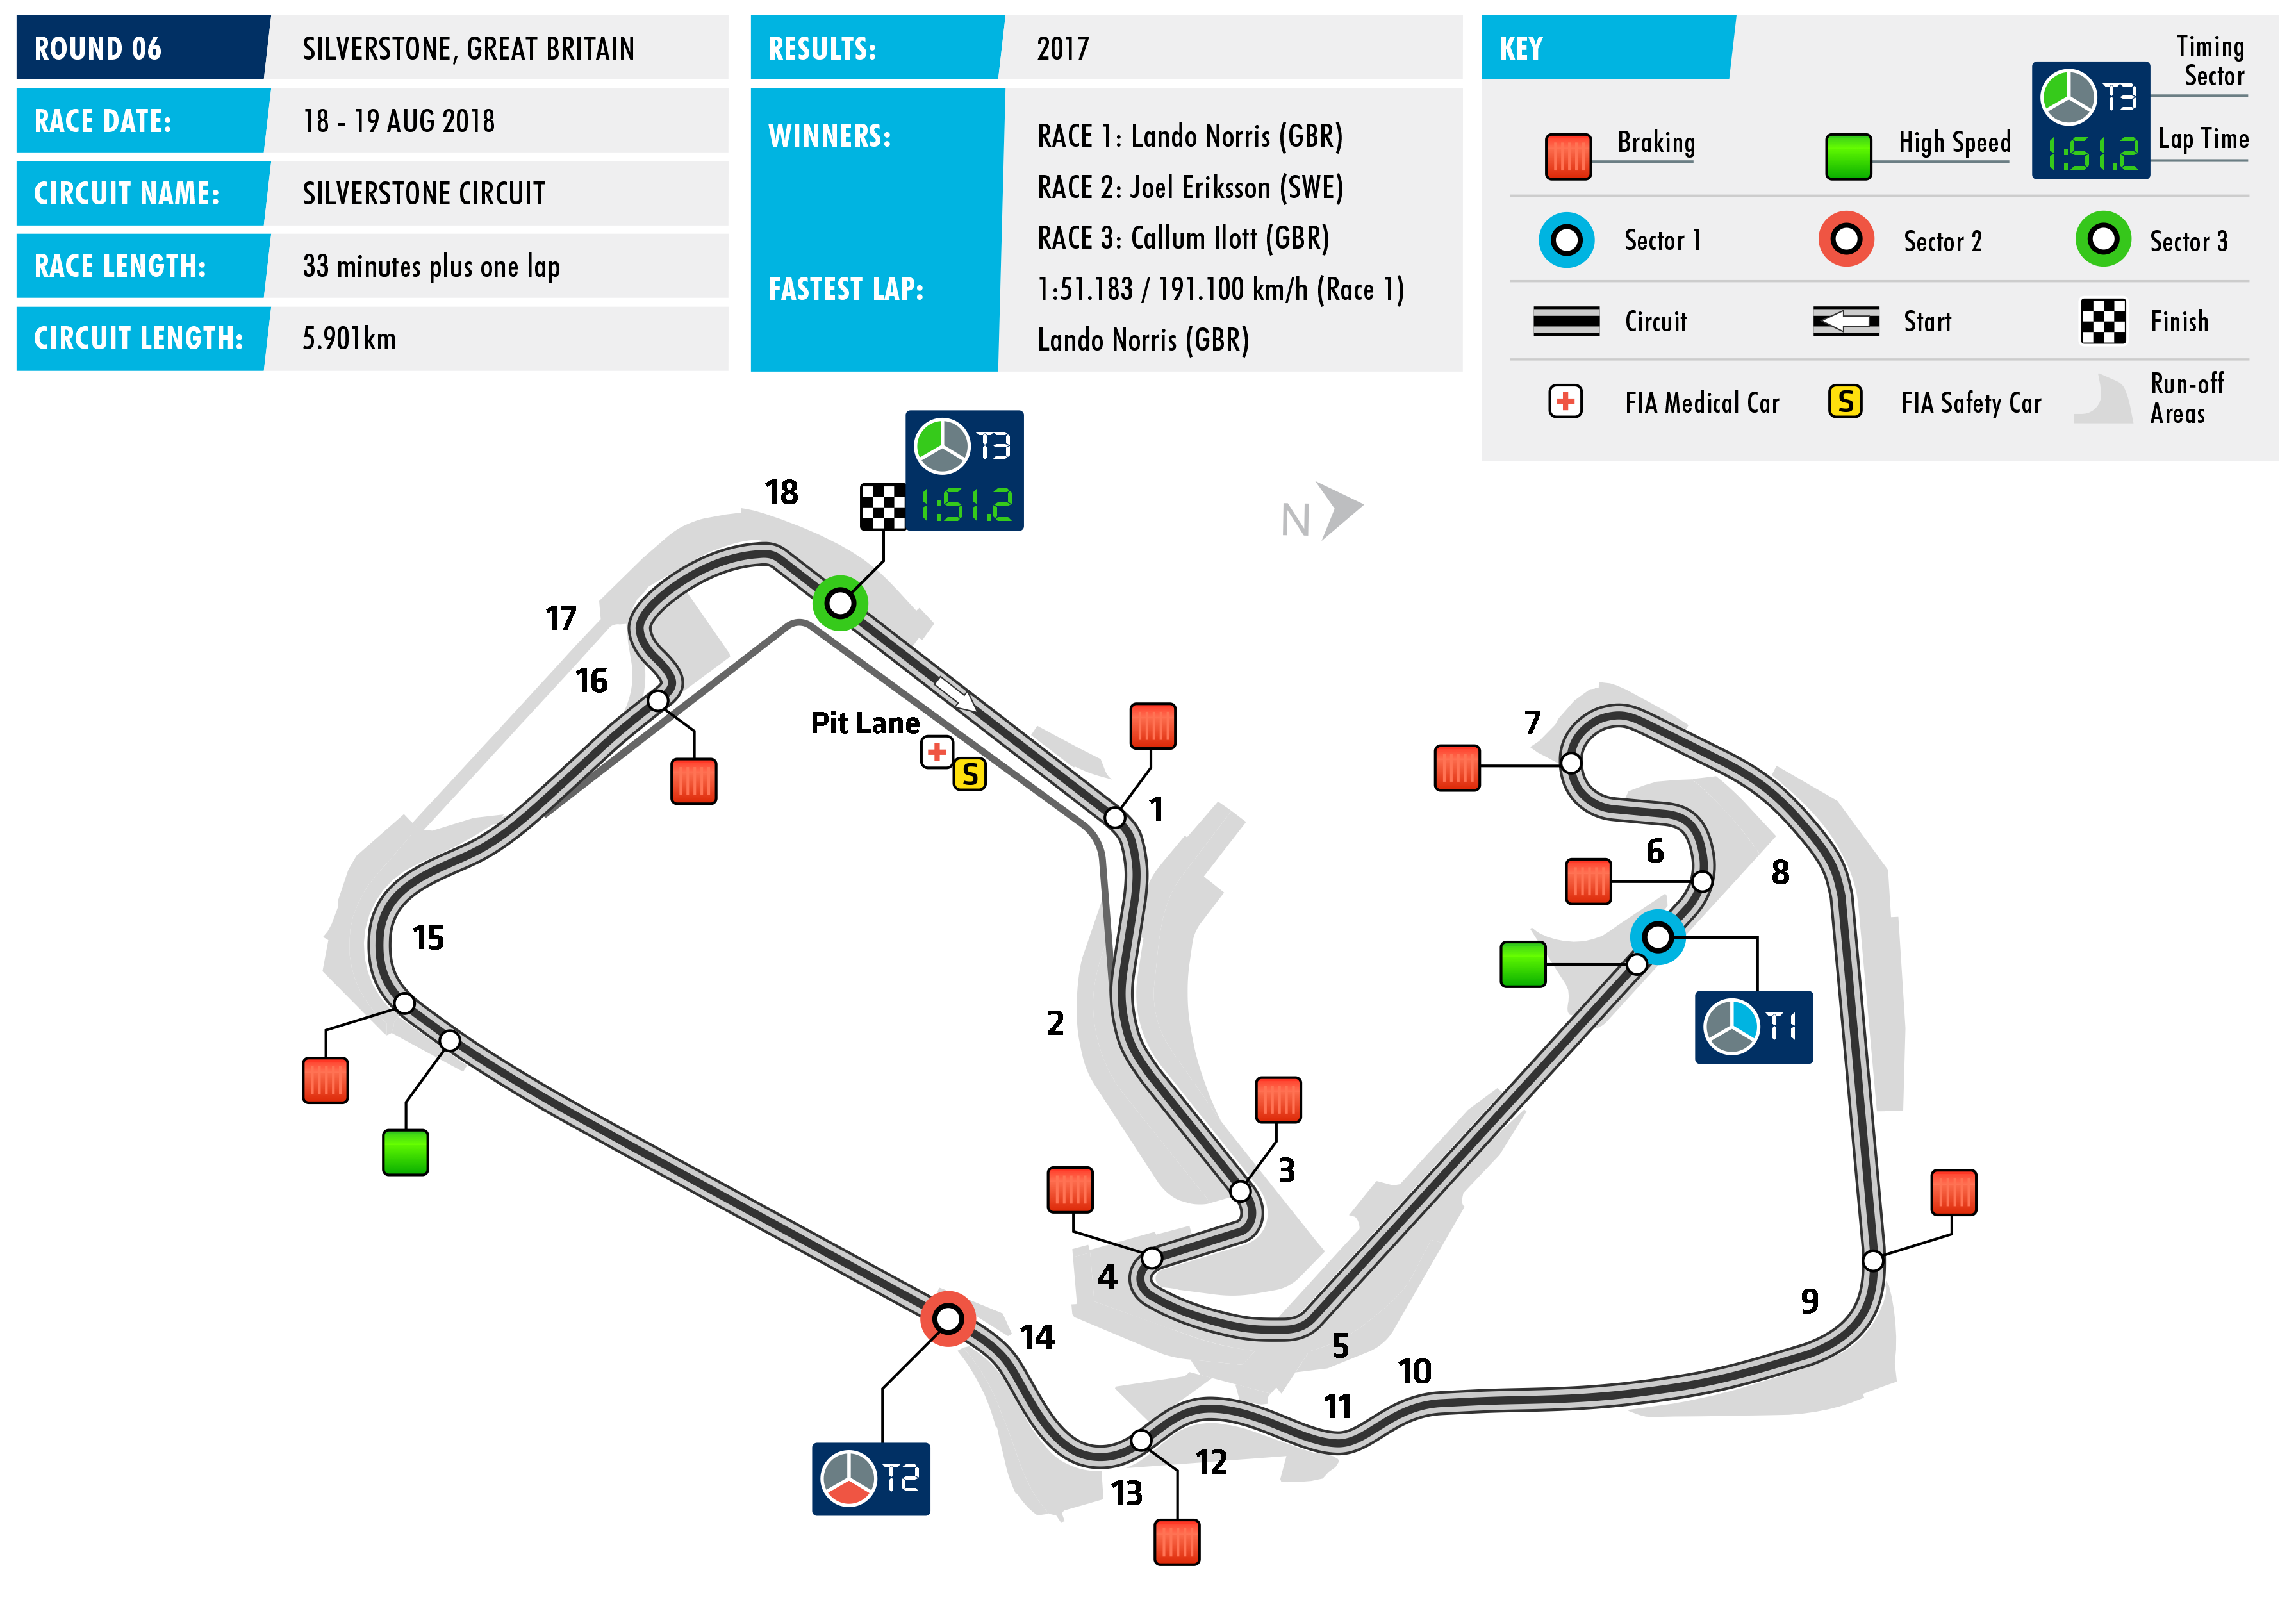 f32018-c06-silverstone.png